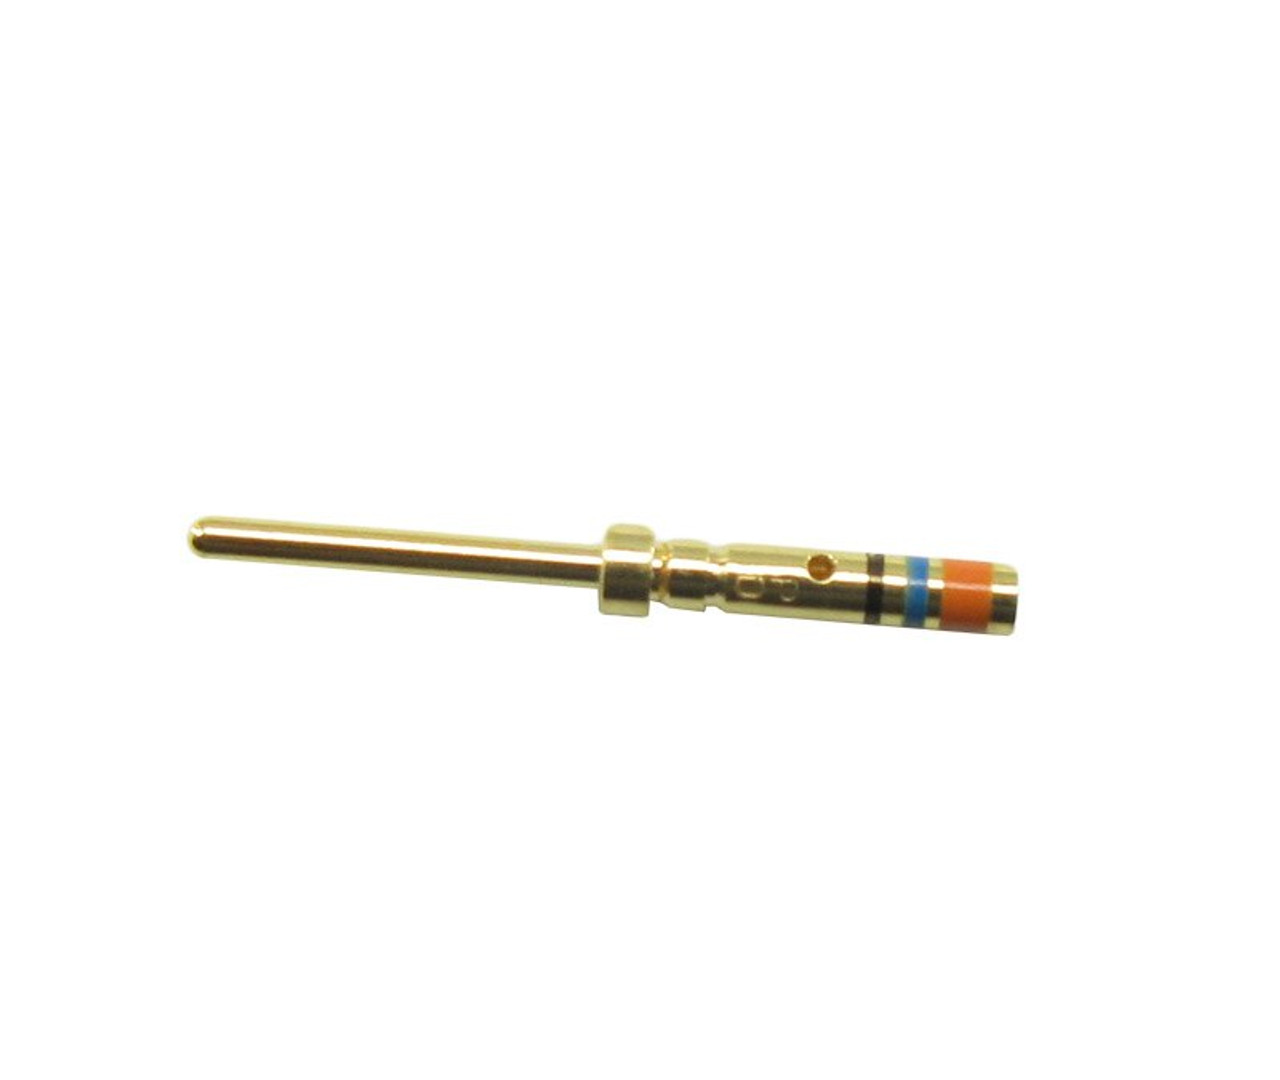 Military Specification M39029/29-213 Contact, Electrical at